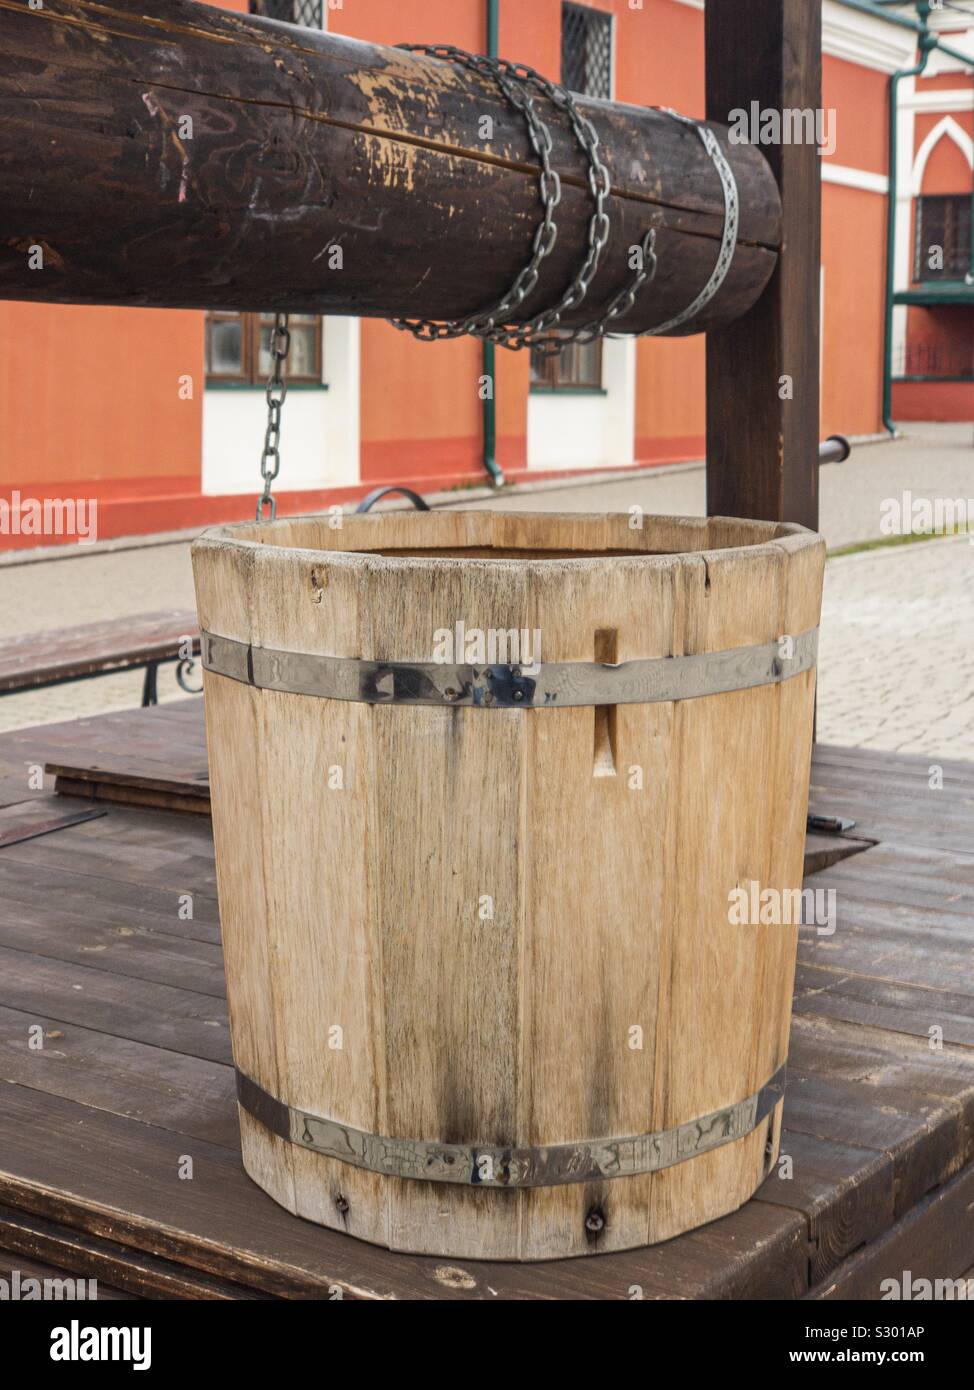 Russian/Slavic ancient wooden well’s bucket in Kaluga, Russia. Stock Photo